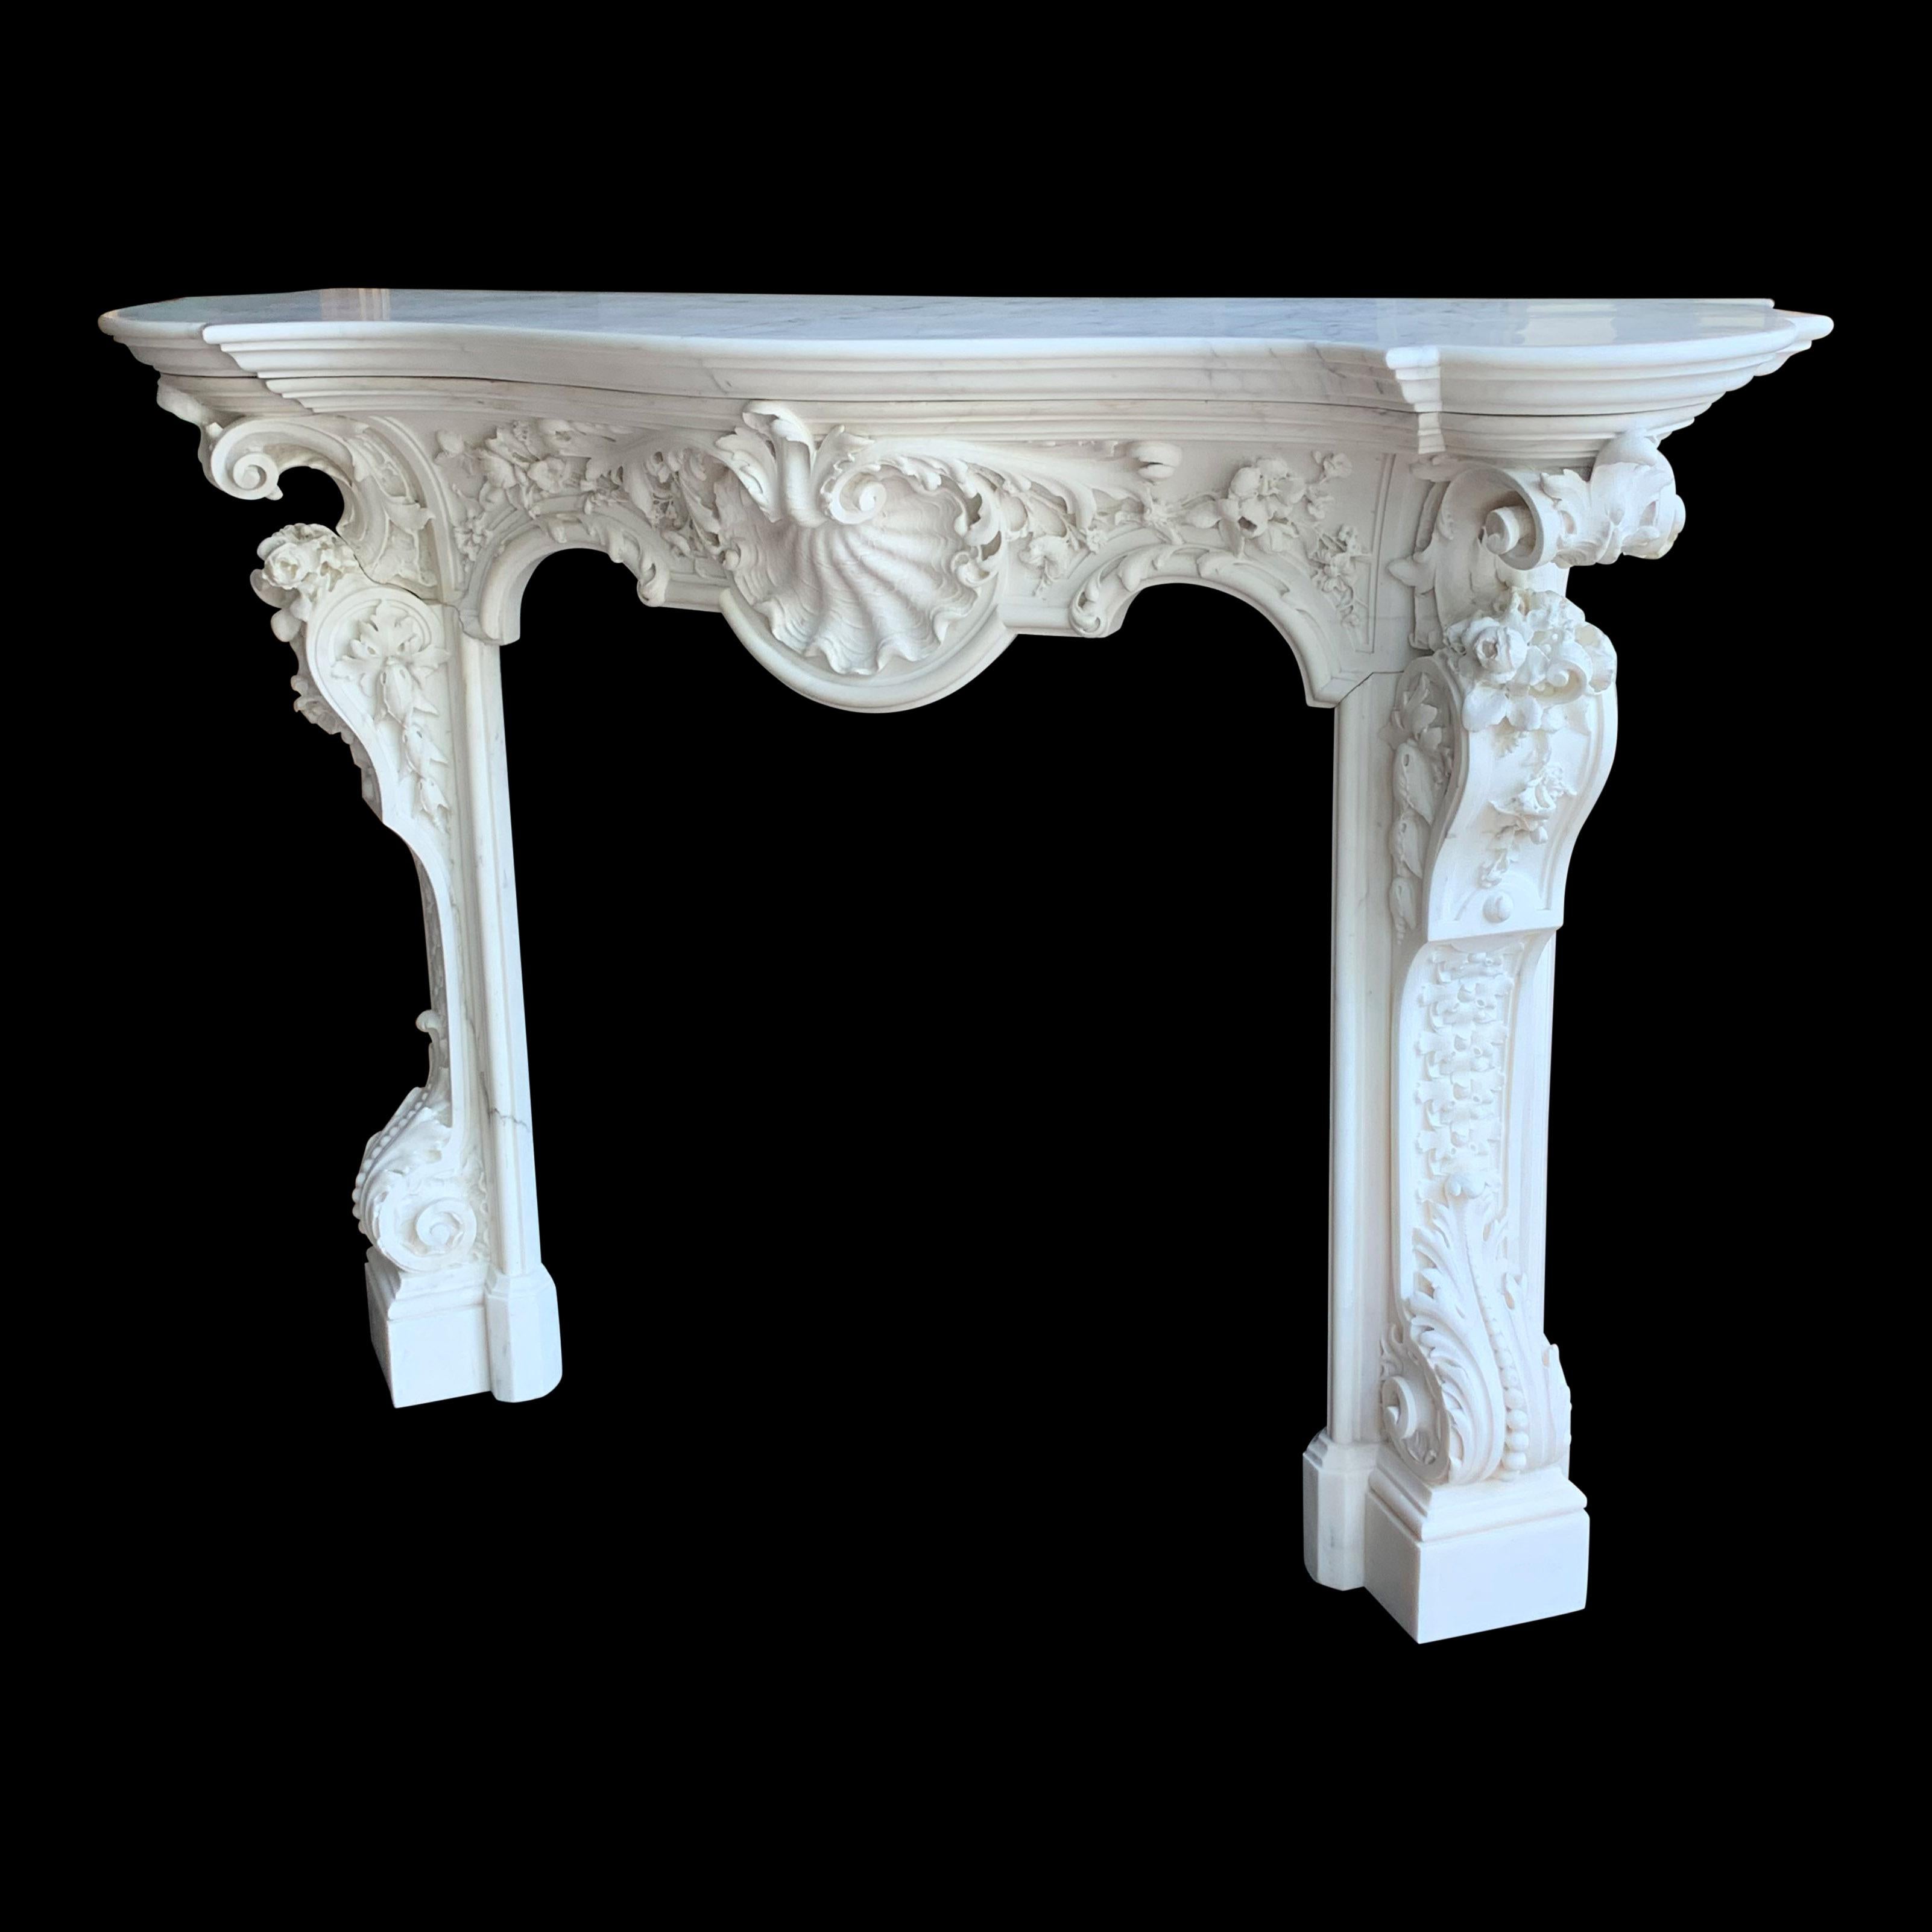 A pure statuary 18th century French Chimneypiece.
The Frieze consisting of a dramatic carved shell cartouche with bold acanthus foliage sweeping to either side with floral enrichment. The Jambs have elongated decorated consoles with an acanthus